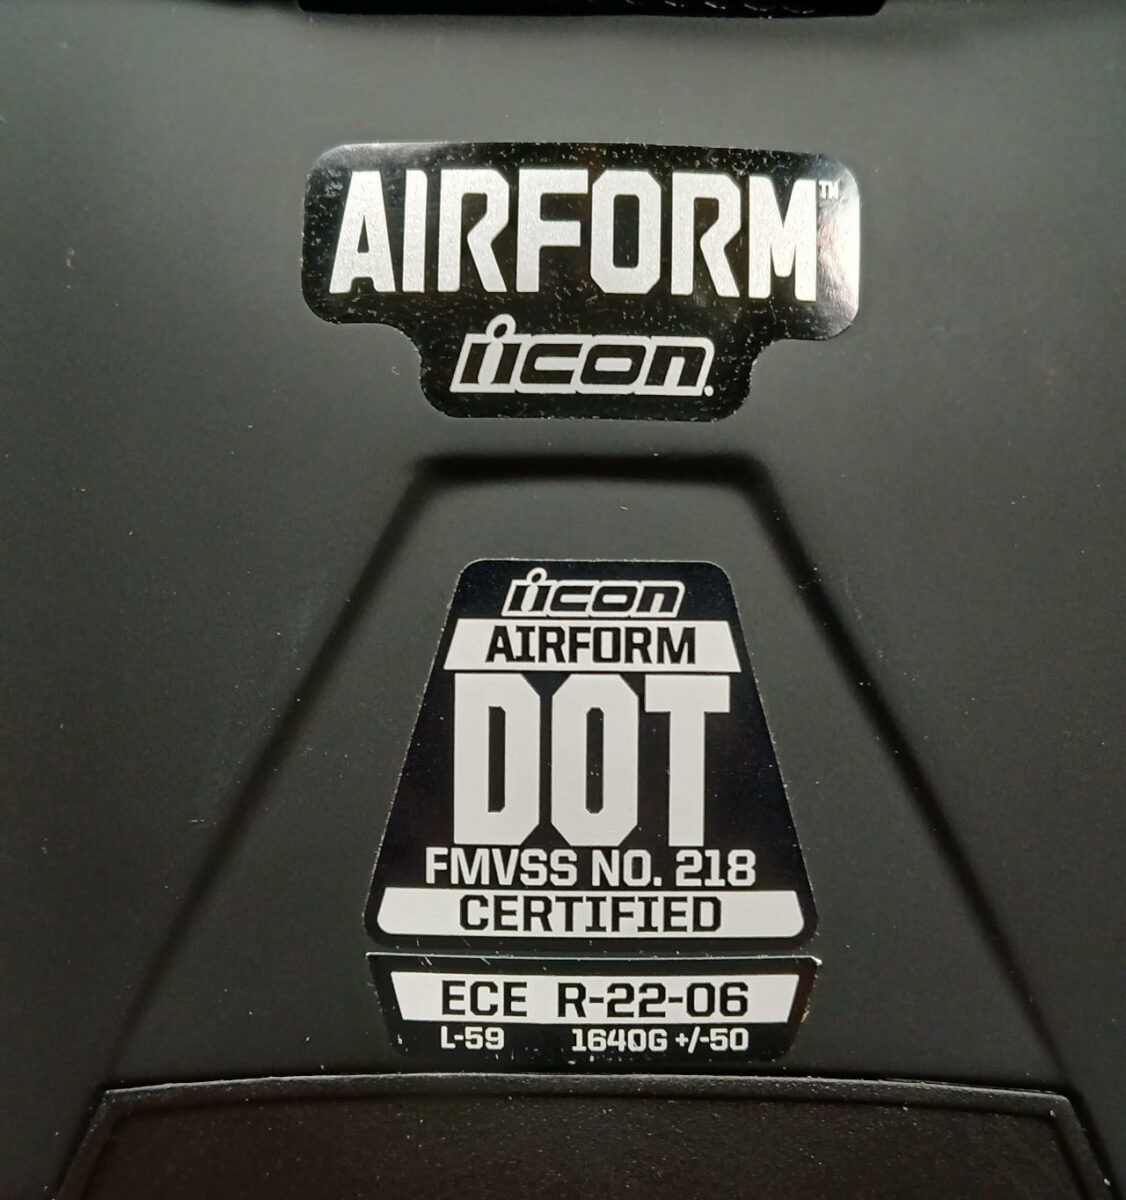 Icon AirForm Motorcycle Certifications.